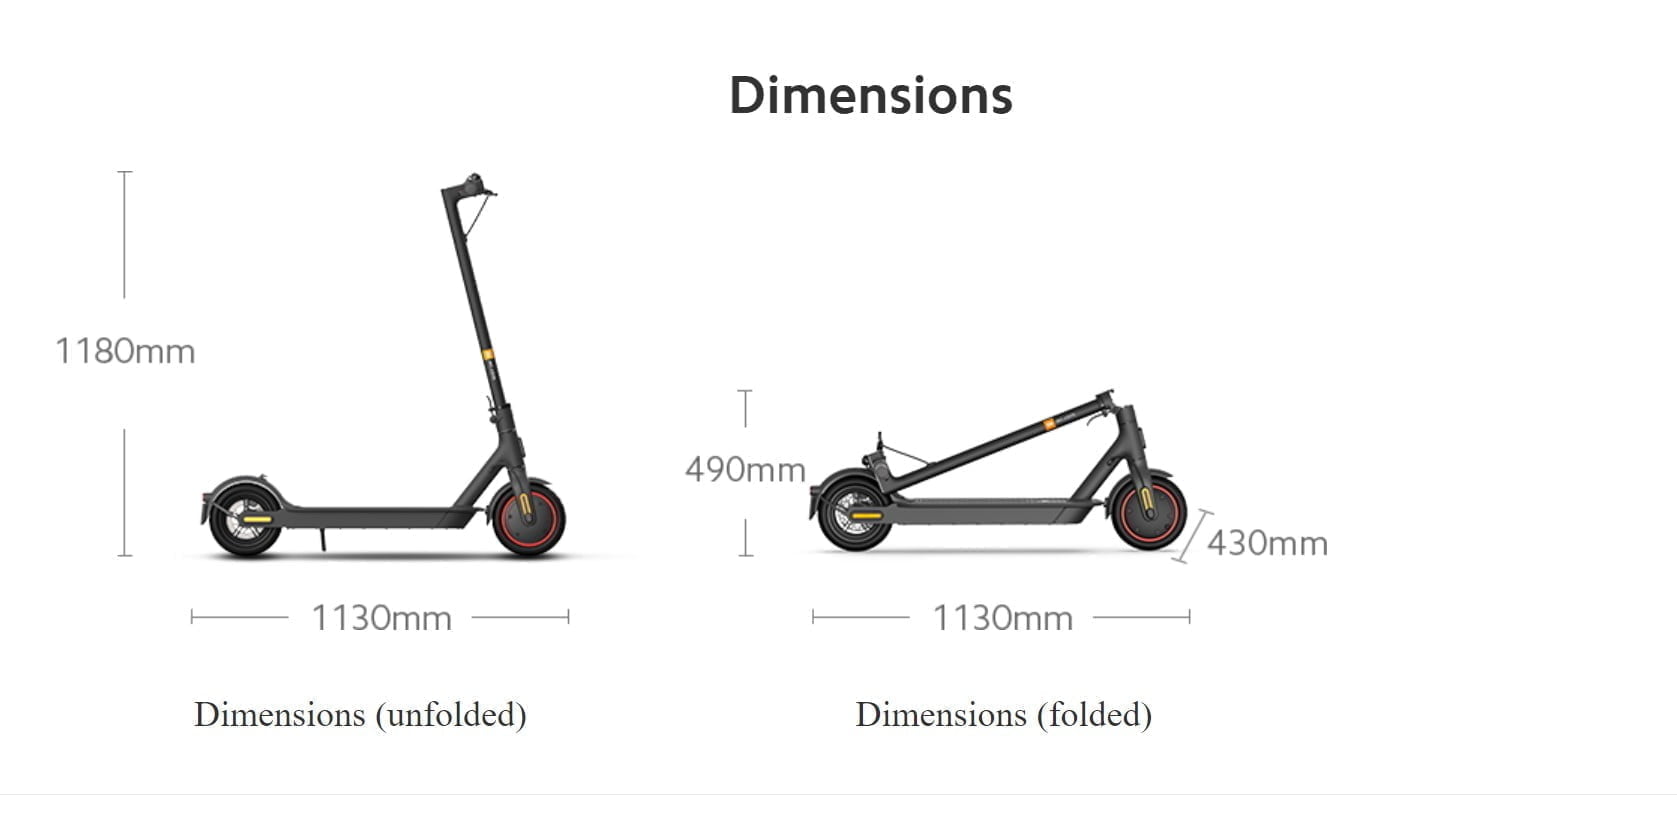 Screenshot 2021 02 27 190804 Xiaomi &Lt;H1&Gt;Mi Electric Scooterpro 2&Lt;/H1&Gt; &Lt;H2&Gt;Ride With Power, Go The Distance&Lt;/H2&Gt; &Lt;P Class=&Quot;Title&Quot;&Gt;Performance Upgrades That Will Take You Further: The Perfect Combination Of Practicality And Beauty, Taking You To Further Places.&Lt;/P&Gt; 600W Powerful Motor Performance Enjoy The Speed &Lt;P Class=&Quot;Title&Quot;&Gt;Three-Speed Modes, Easy Switch: When Commuting To Work, Press S To Go Faster. When Cruising Around The Park, Press D, And In Crowded Areas, You Can Turn On The Pedestrian Mode To Go Slower. Simply Double Press The Power Button To Switch Between Modes And Easily Adjust The Speed To Your Surroundings.&Lt;/P&Gt; High Safety Lithium Battery: 45Km Super Long-Range Battery New Generation Energy Recovery System: Convert Kinetic Energy Into Electrical Energy For Longer Battery Life Central Controls Designed For A Better Riding Experience Easy To Control, Try And You Will Know &Lt;P Class=&Quot;Title&Quot;&Gt;Fold It Up In 3 Seconds&Lt;/P&Gt; Fifth-Generation Bms Smart Battery Management System